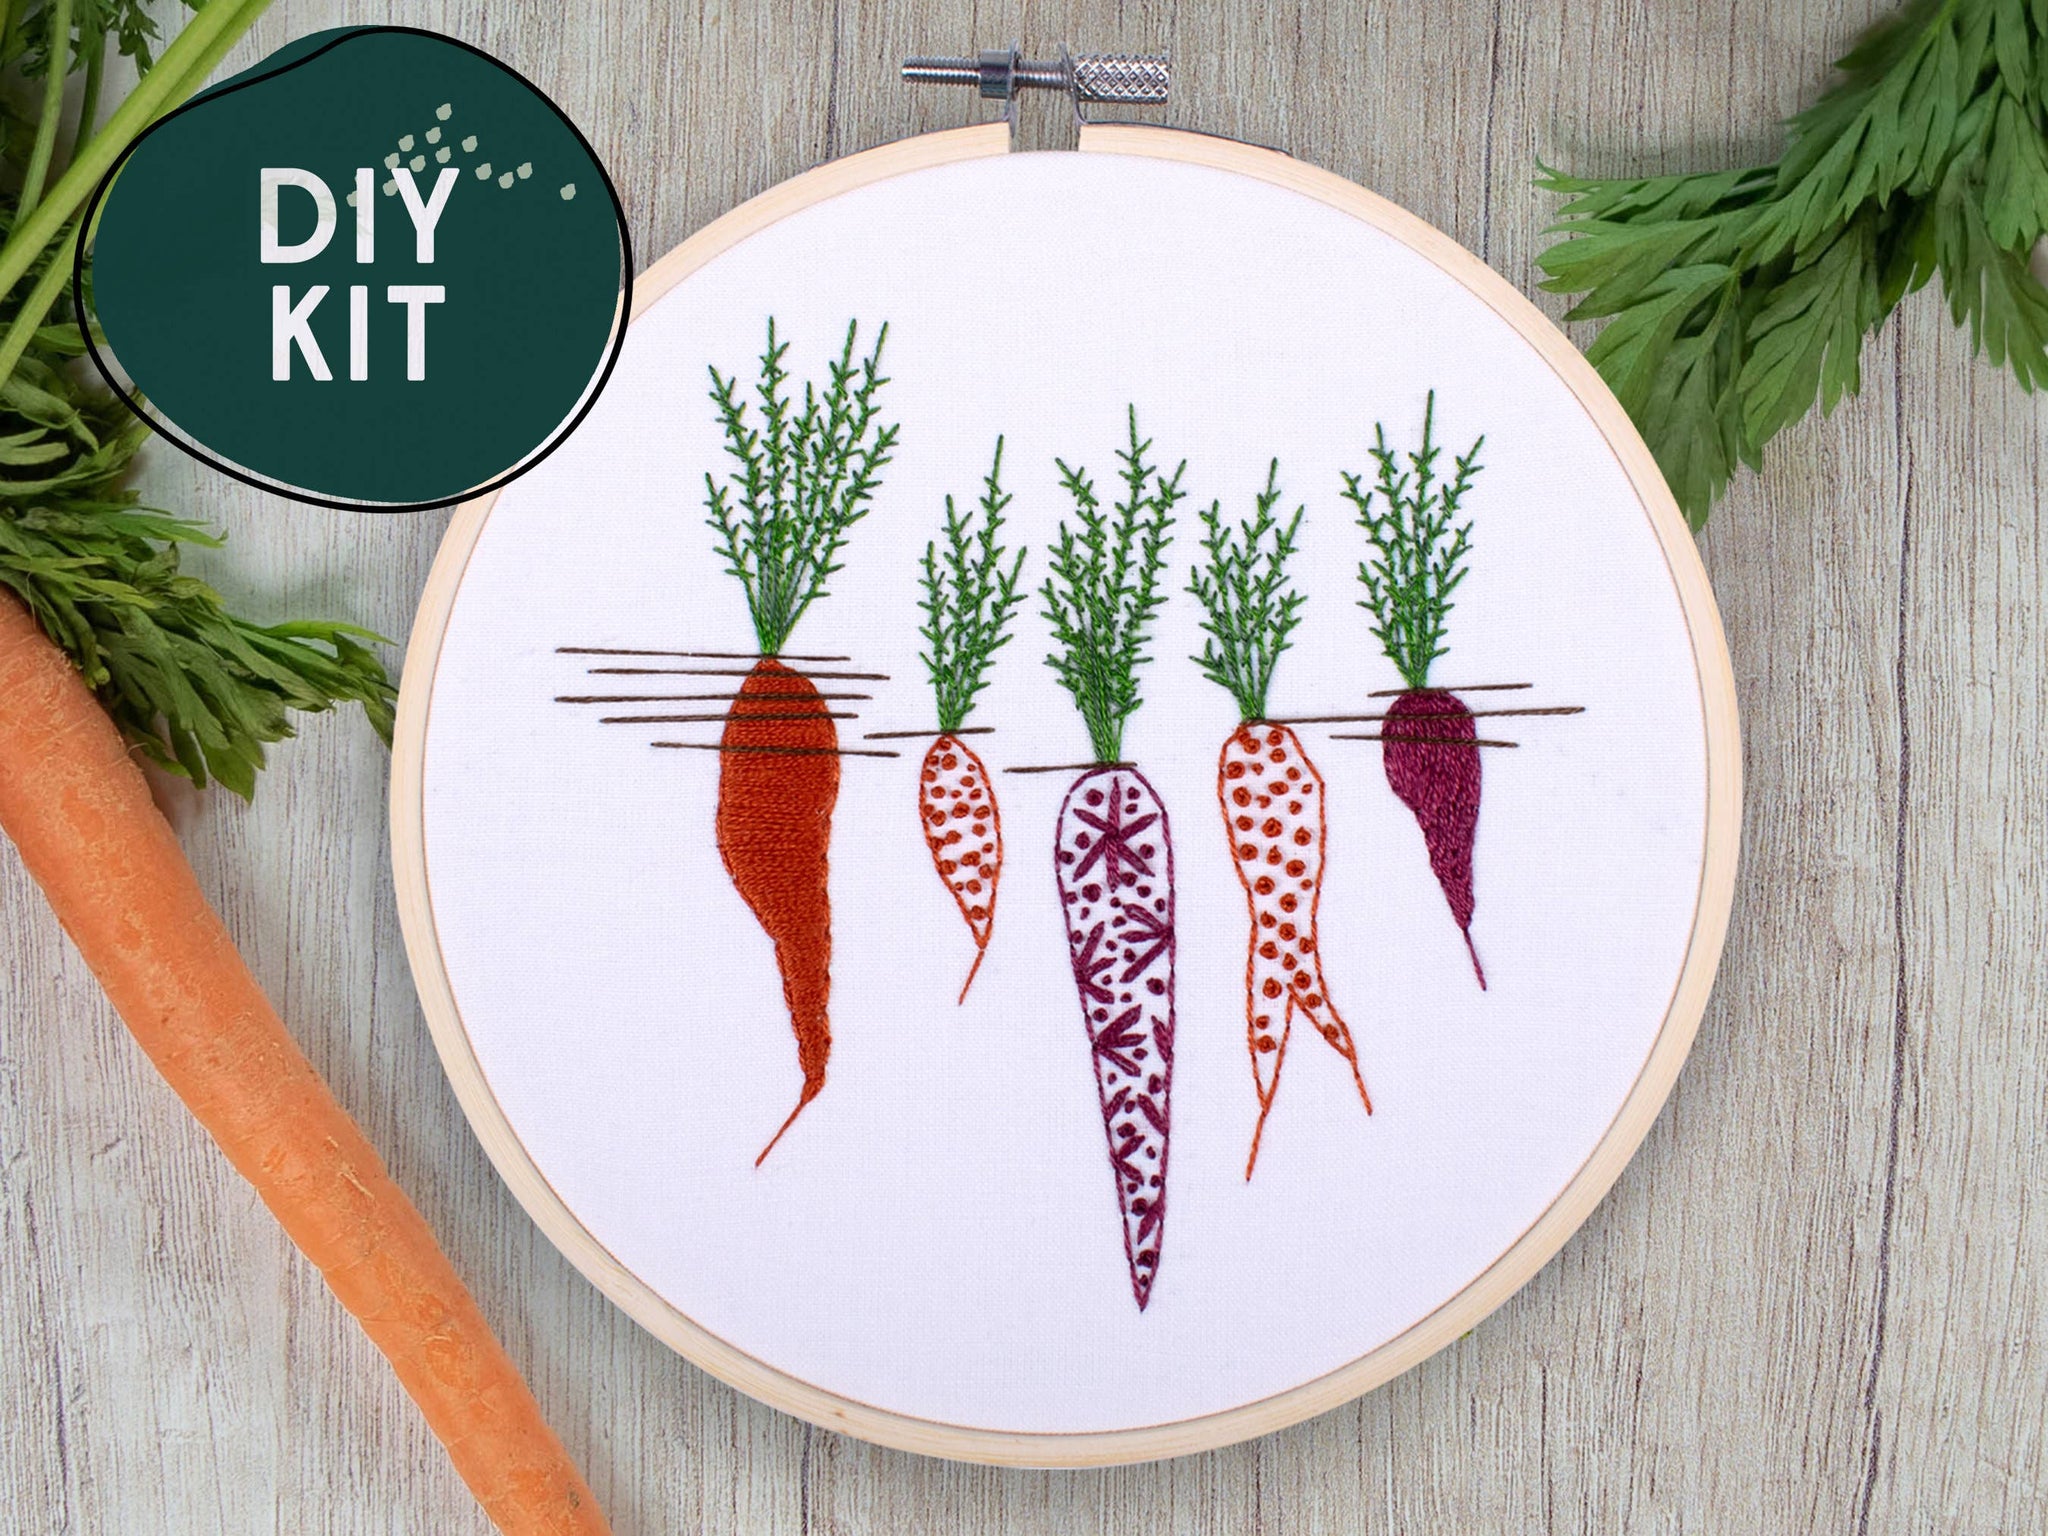 Carrot Embroidery Kit | Easy DIY Kit For Adults